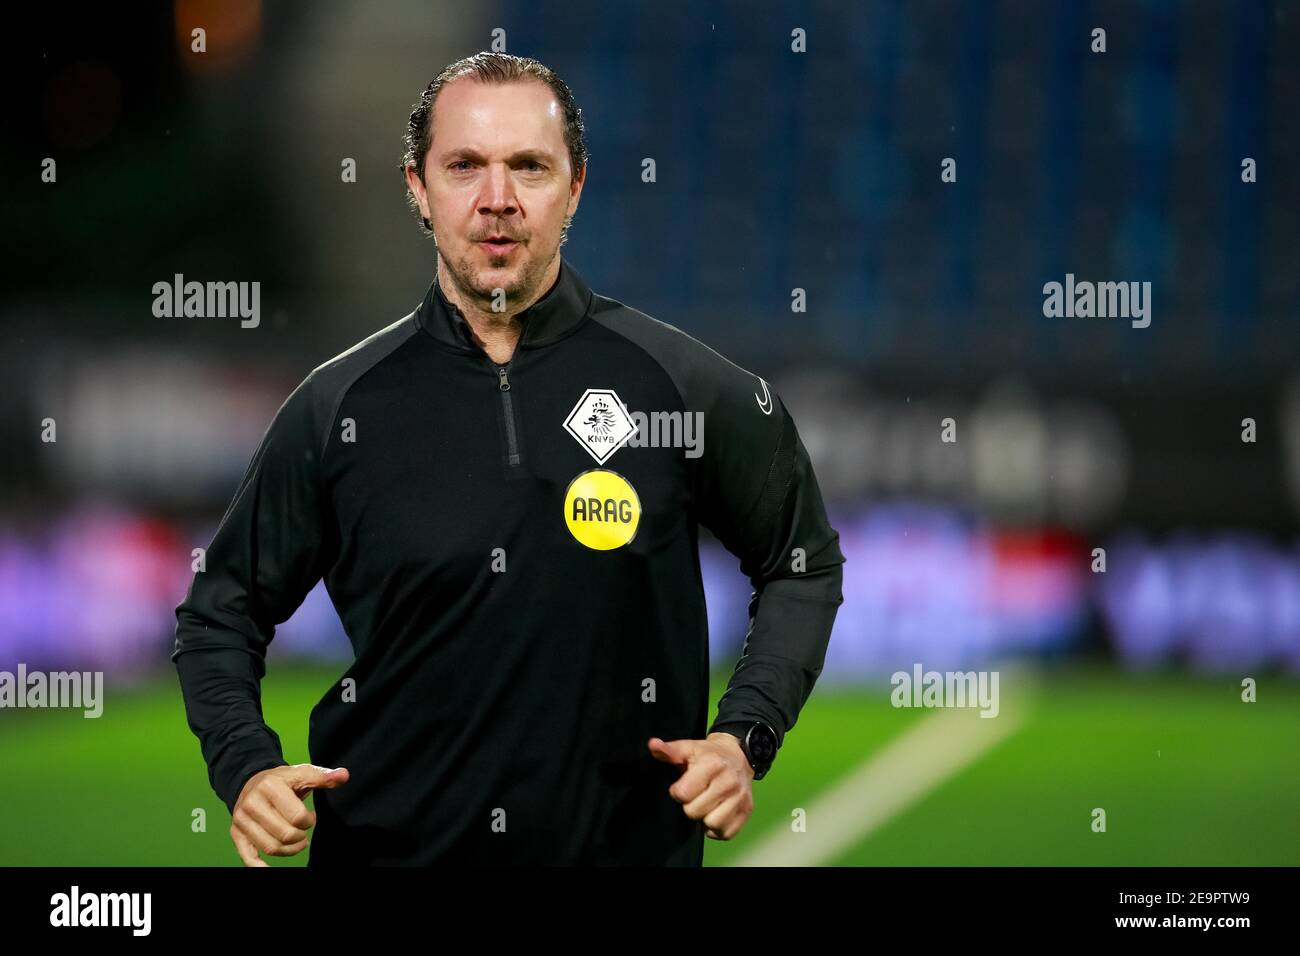 EINDHOVEN, NETHERLANDS - FEBRUARY 5: (L-R): Assistant Referee Rob van de Ven during the Dutch Keukenkampioendivisie match between FC Eindhoven and Go Stock Photo